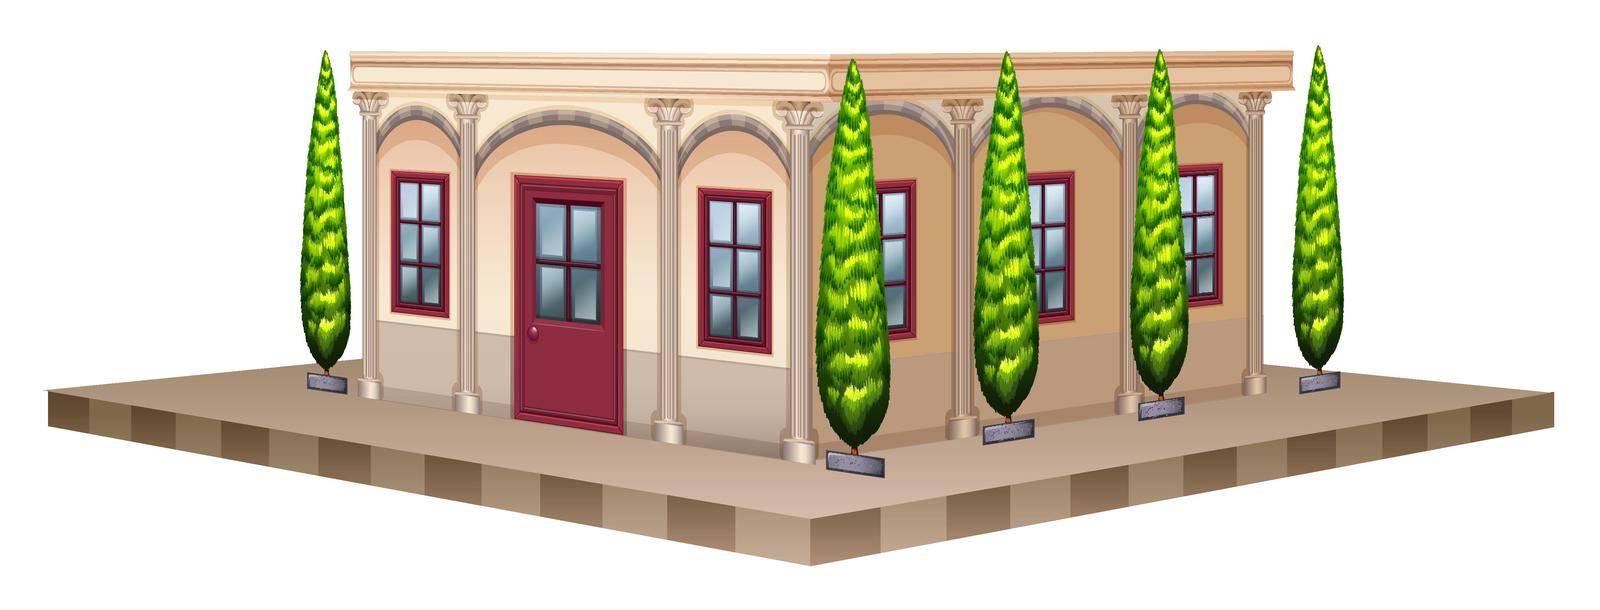 Building with pine trees on the sides illustration